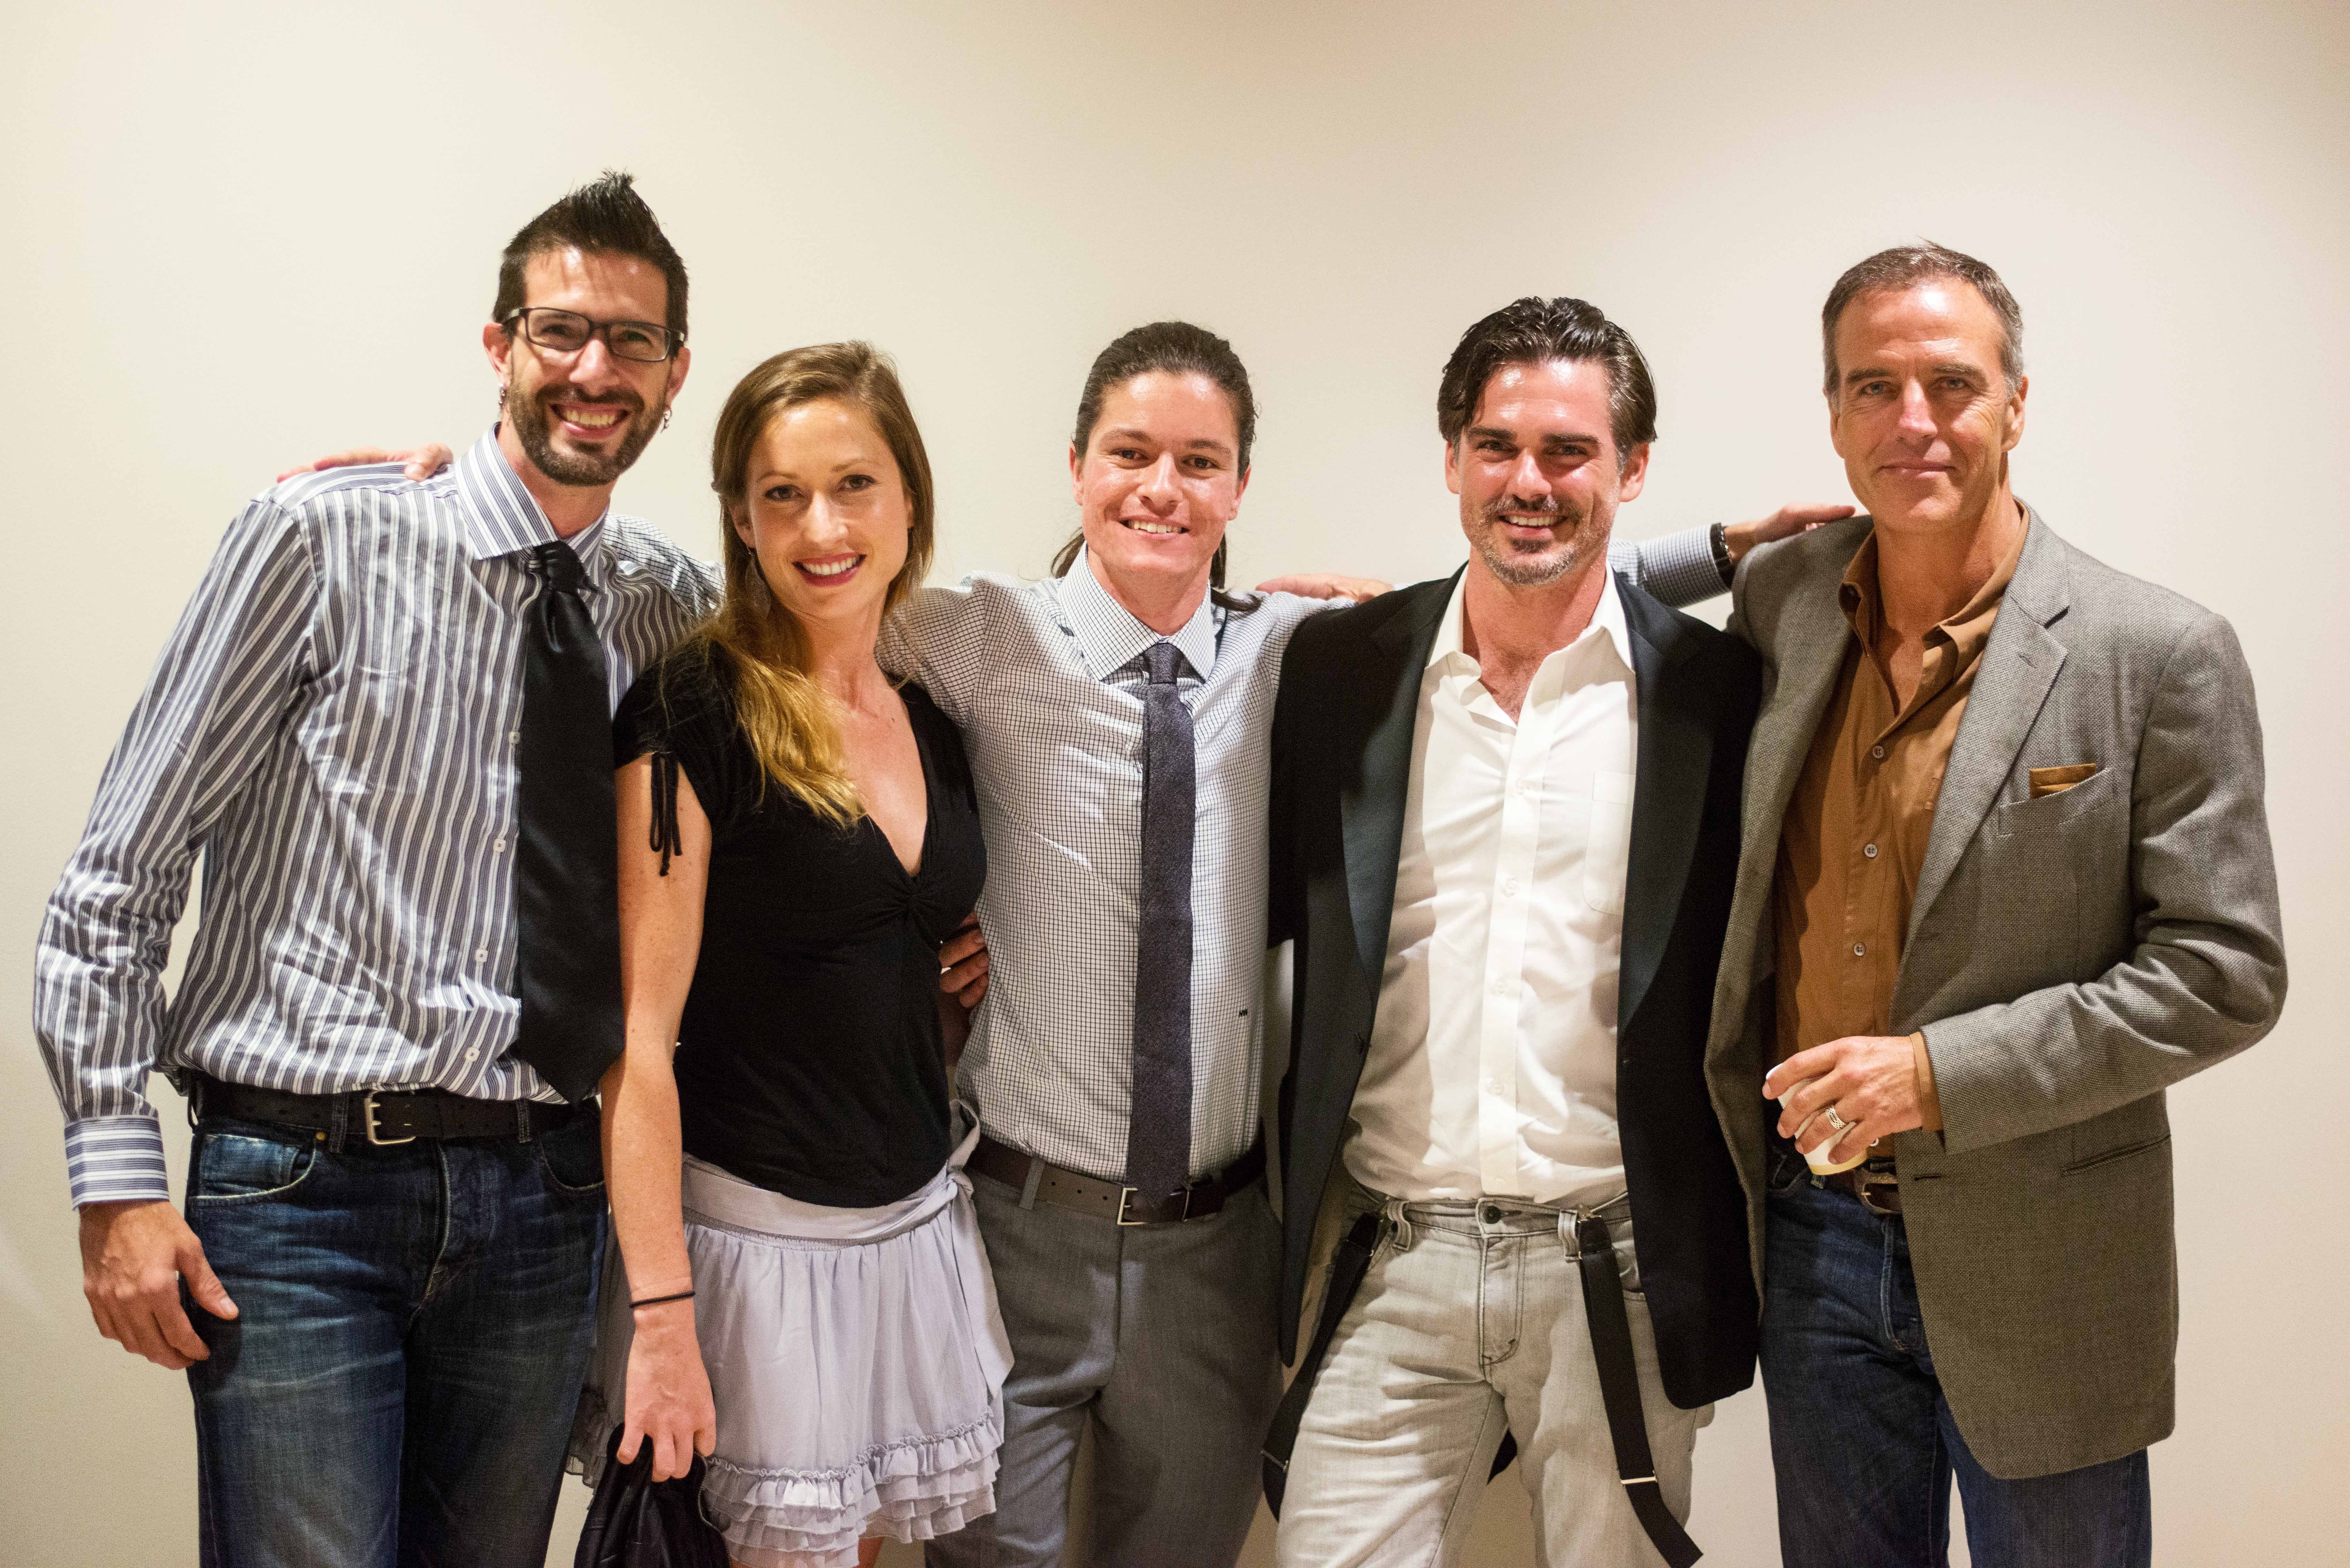 Nicolas Wendl and the cast of 'From the Woods.' [Left to Right] Jasby Williams, Natalie Shaw, Nicolas Wendl, Sean McCracken, Richard Burgi.